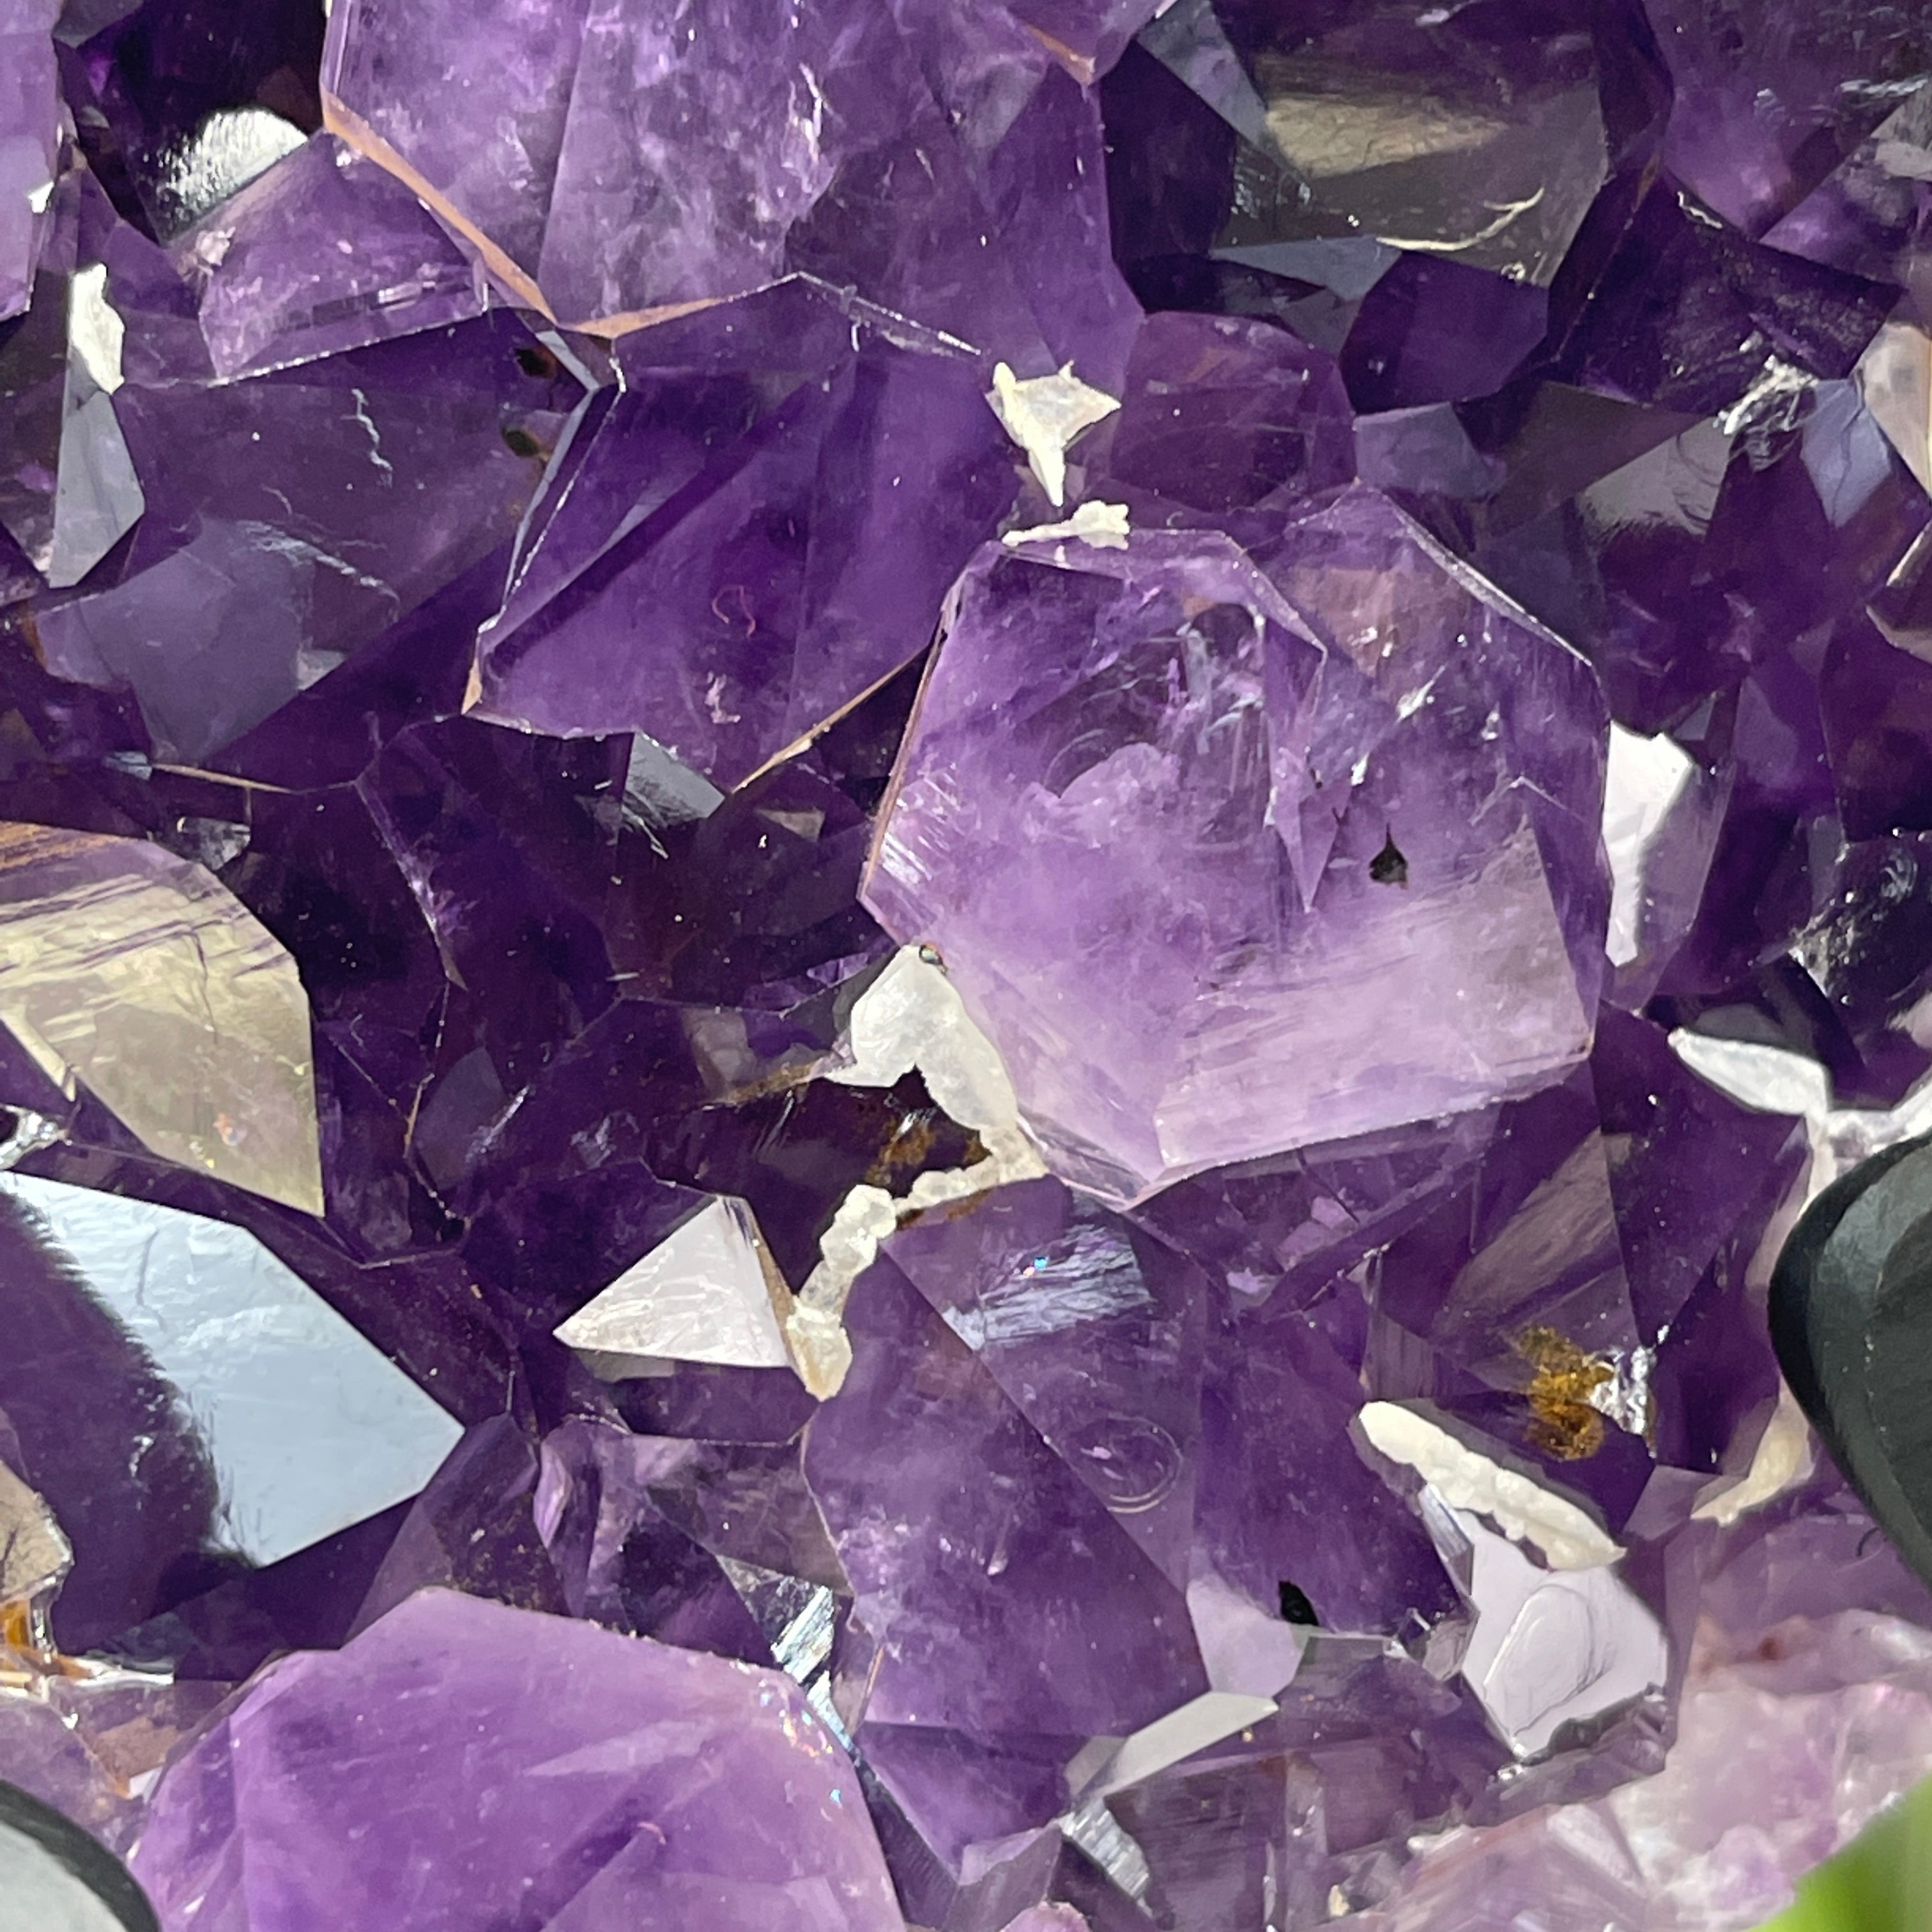 Collection of multiple amethyst crystals